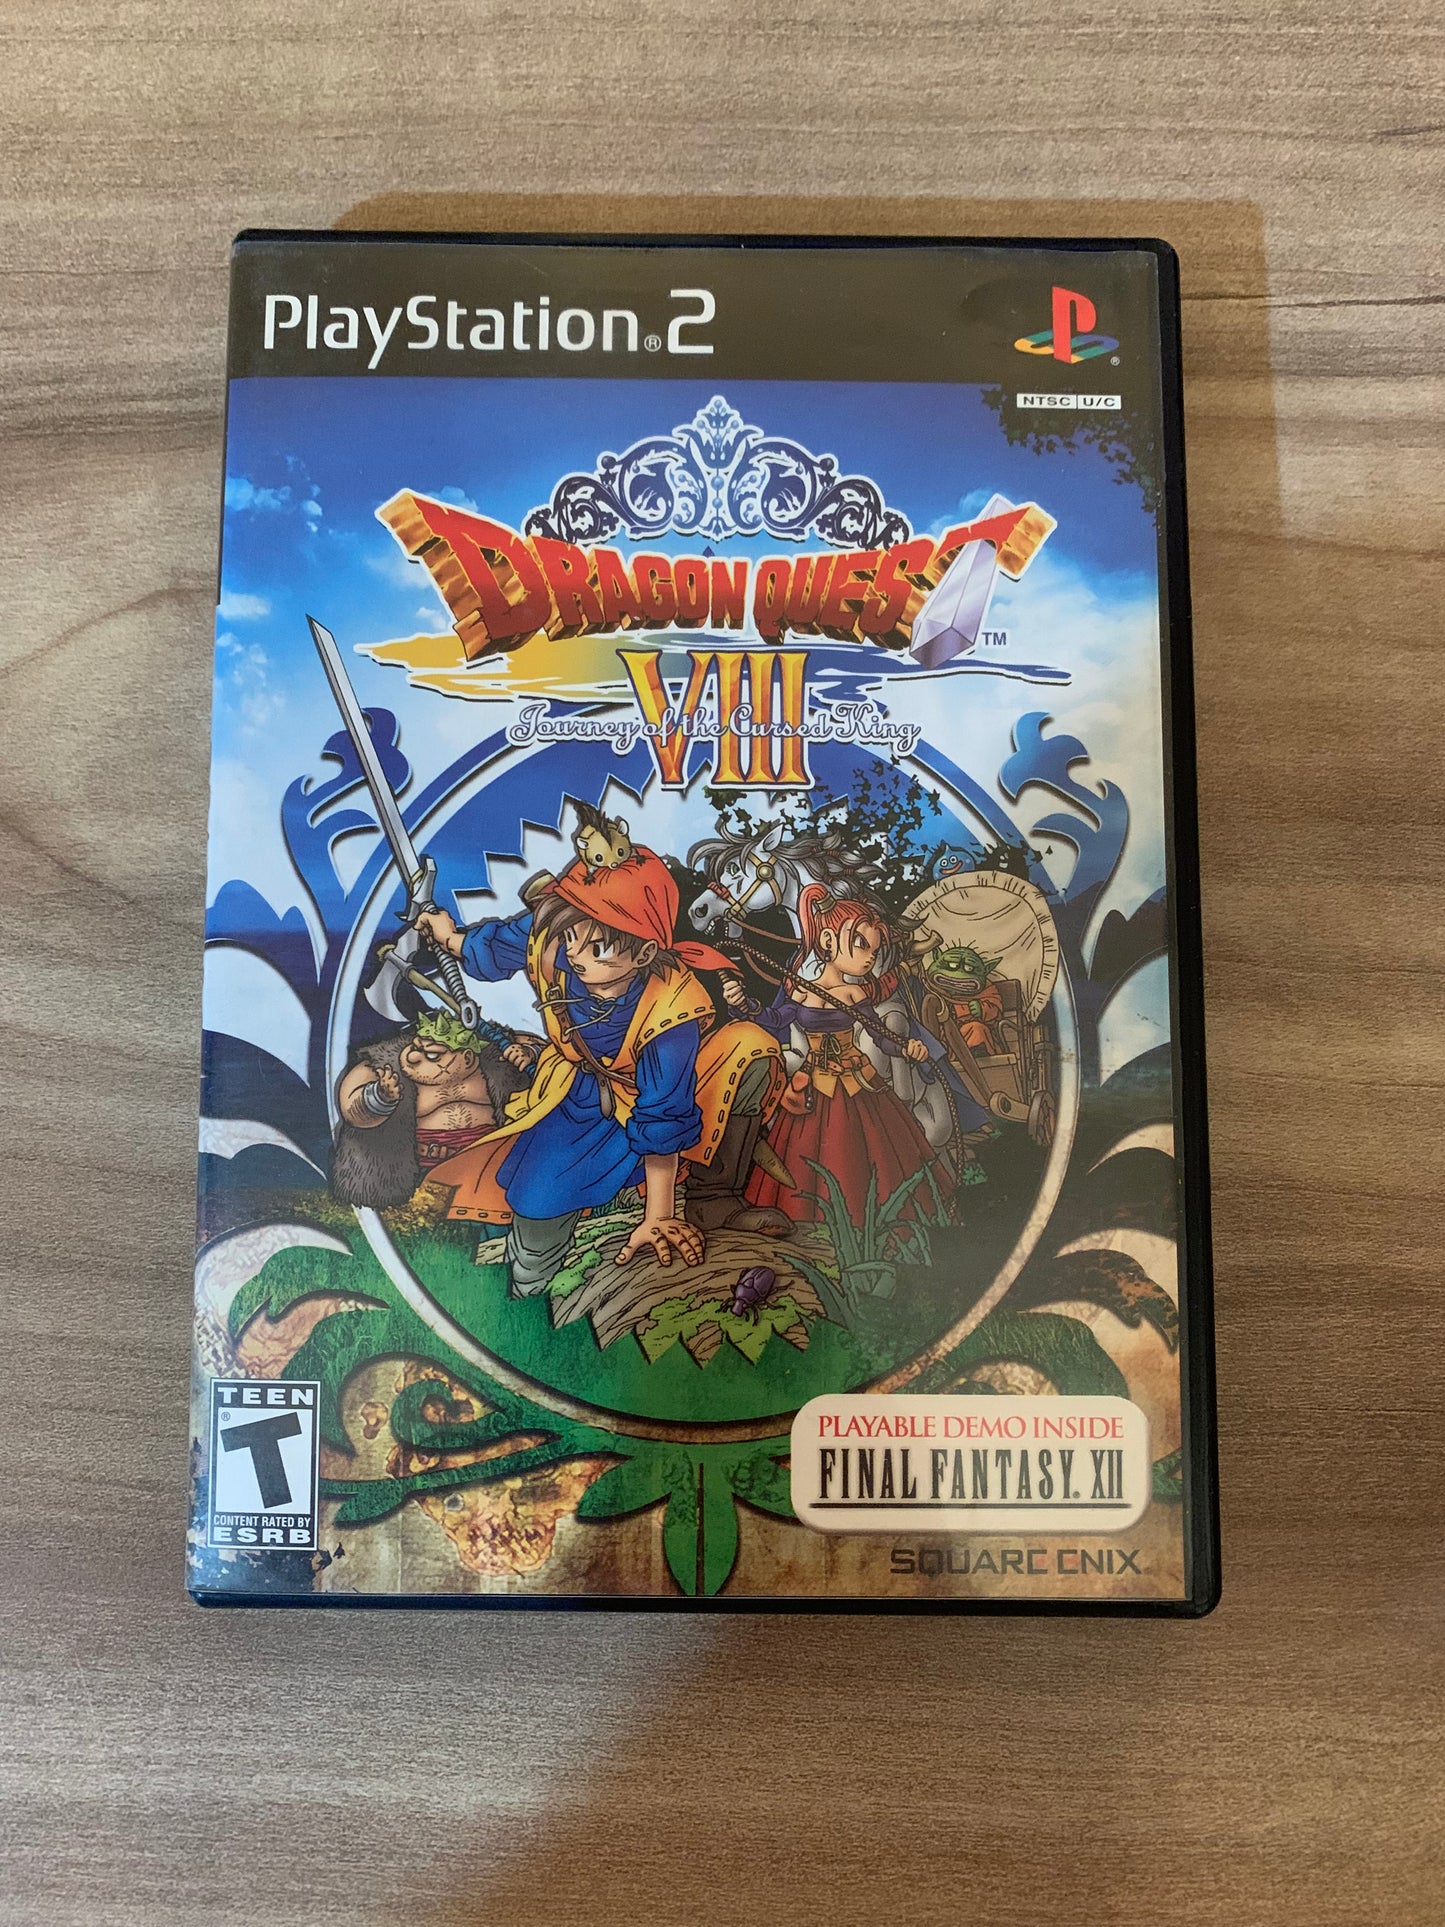 SONY PLAYSTATiON 2 [PS2] | DRAGON QUEST VIII JOURNEY OF THE CURSED KiNG &amp; FiNAL FANTASY XII DEMO